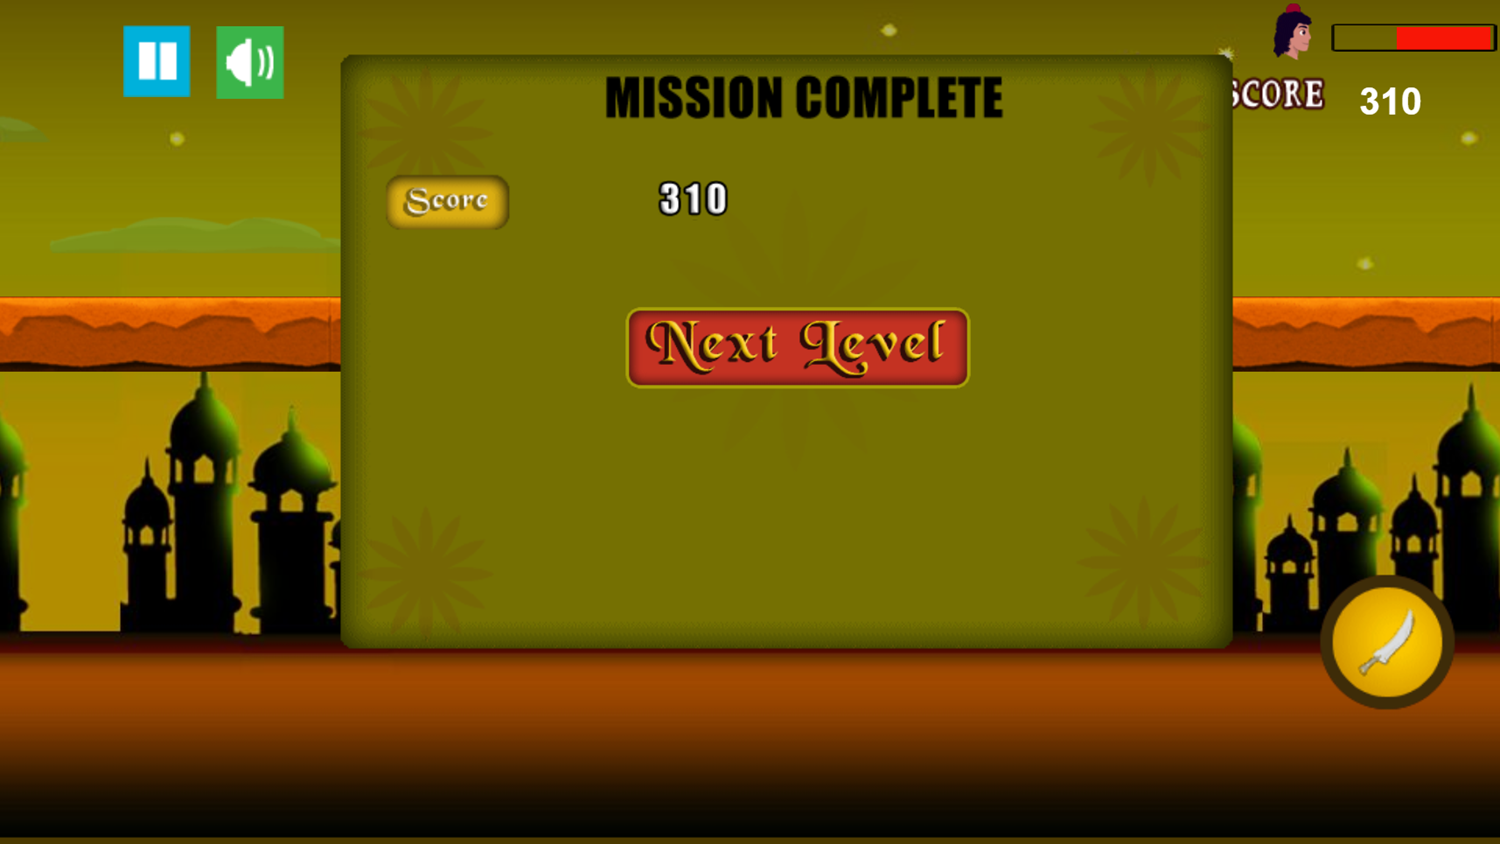 Aladdin Adventure Game Mission Completed Screenshot.